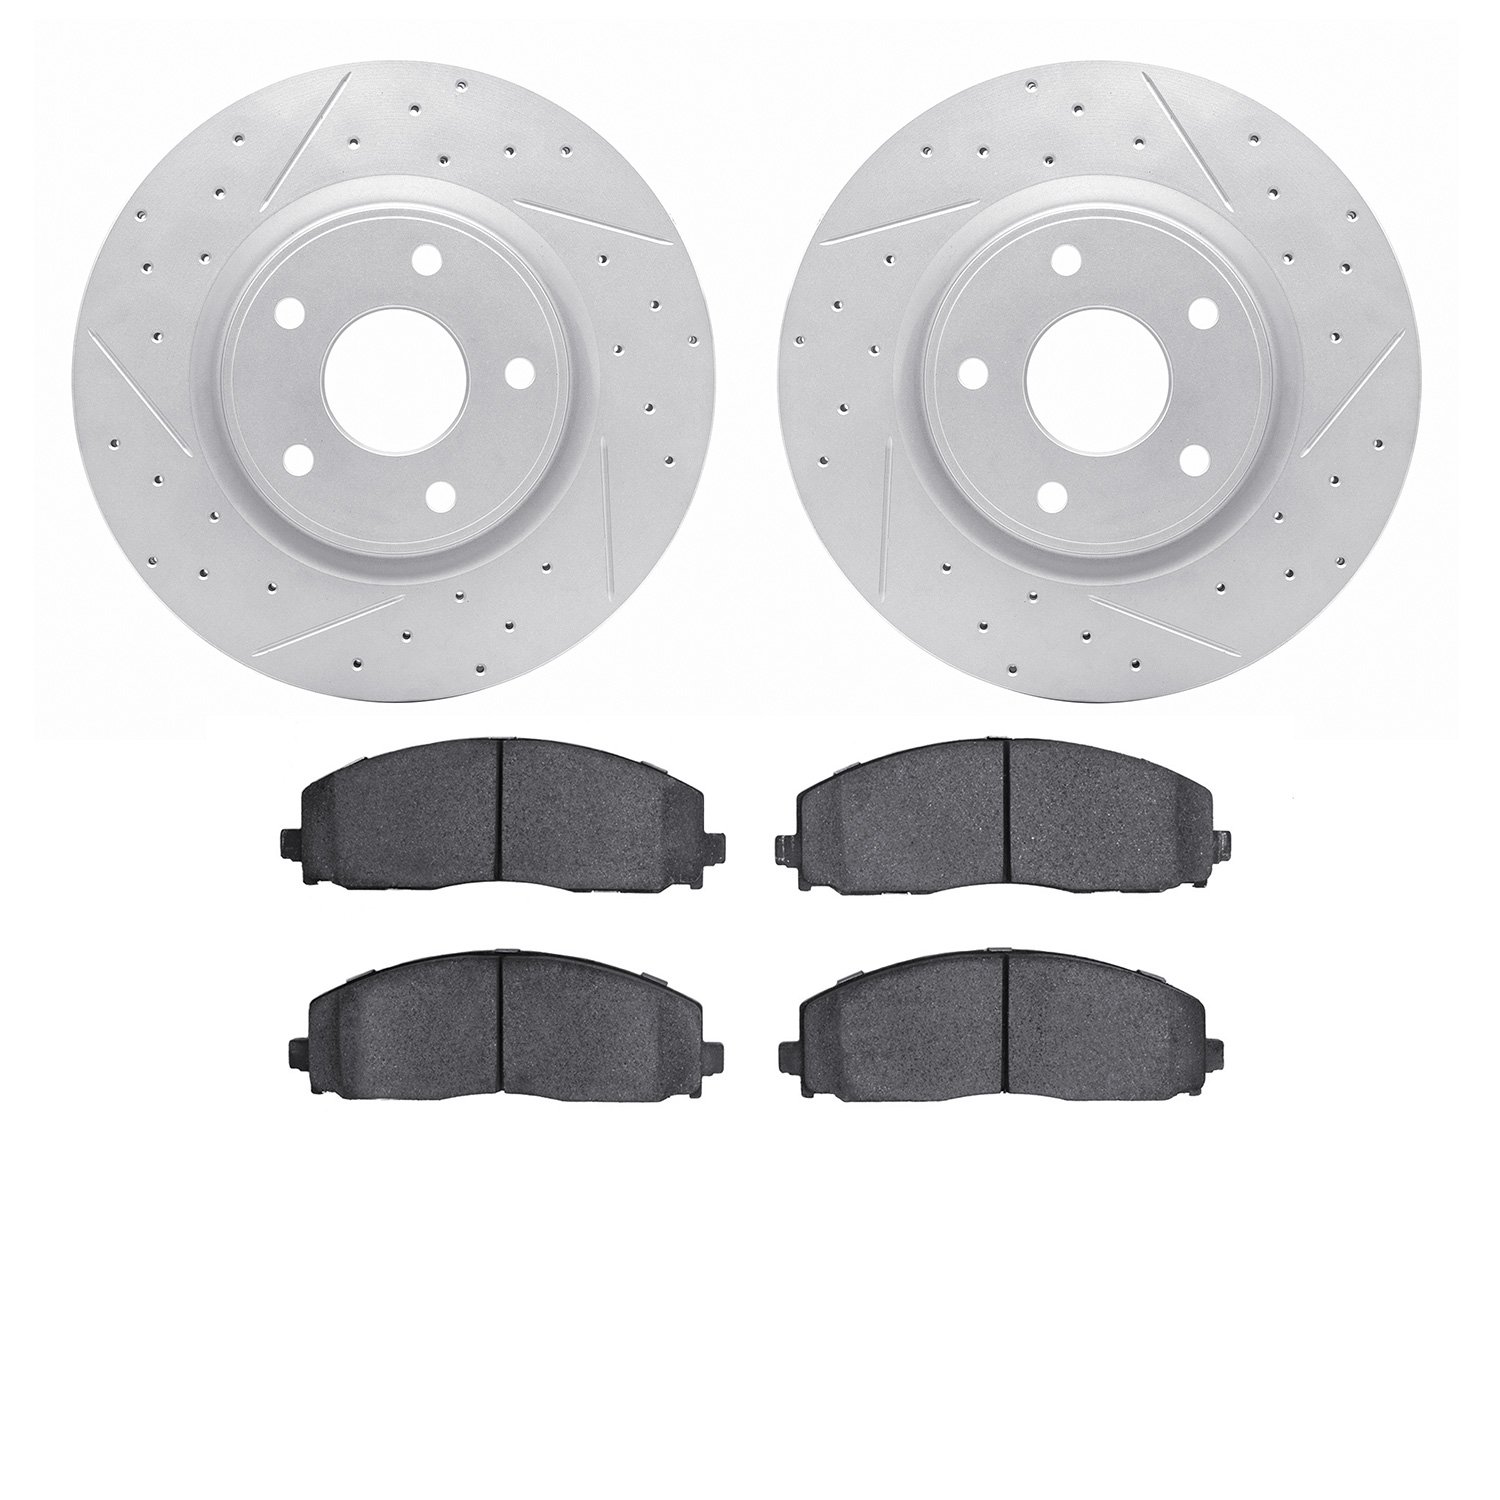 2602-40006 Geoperformance Drilled/Slotted Rotors w/5000 Euro Ceramic Brake Pads Kit, Fits Select Multiple Makes/Models, Position